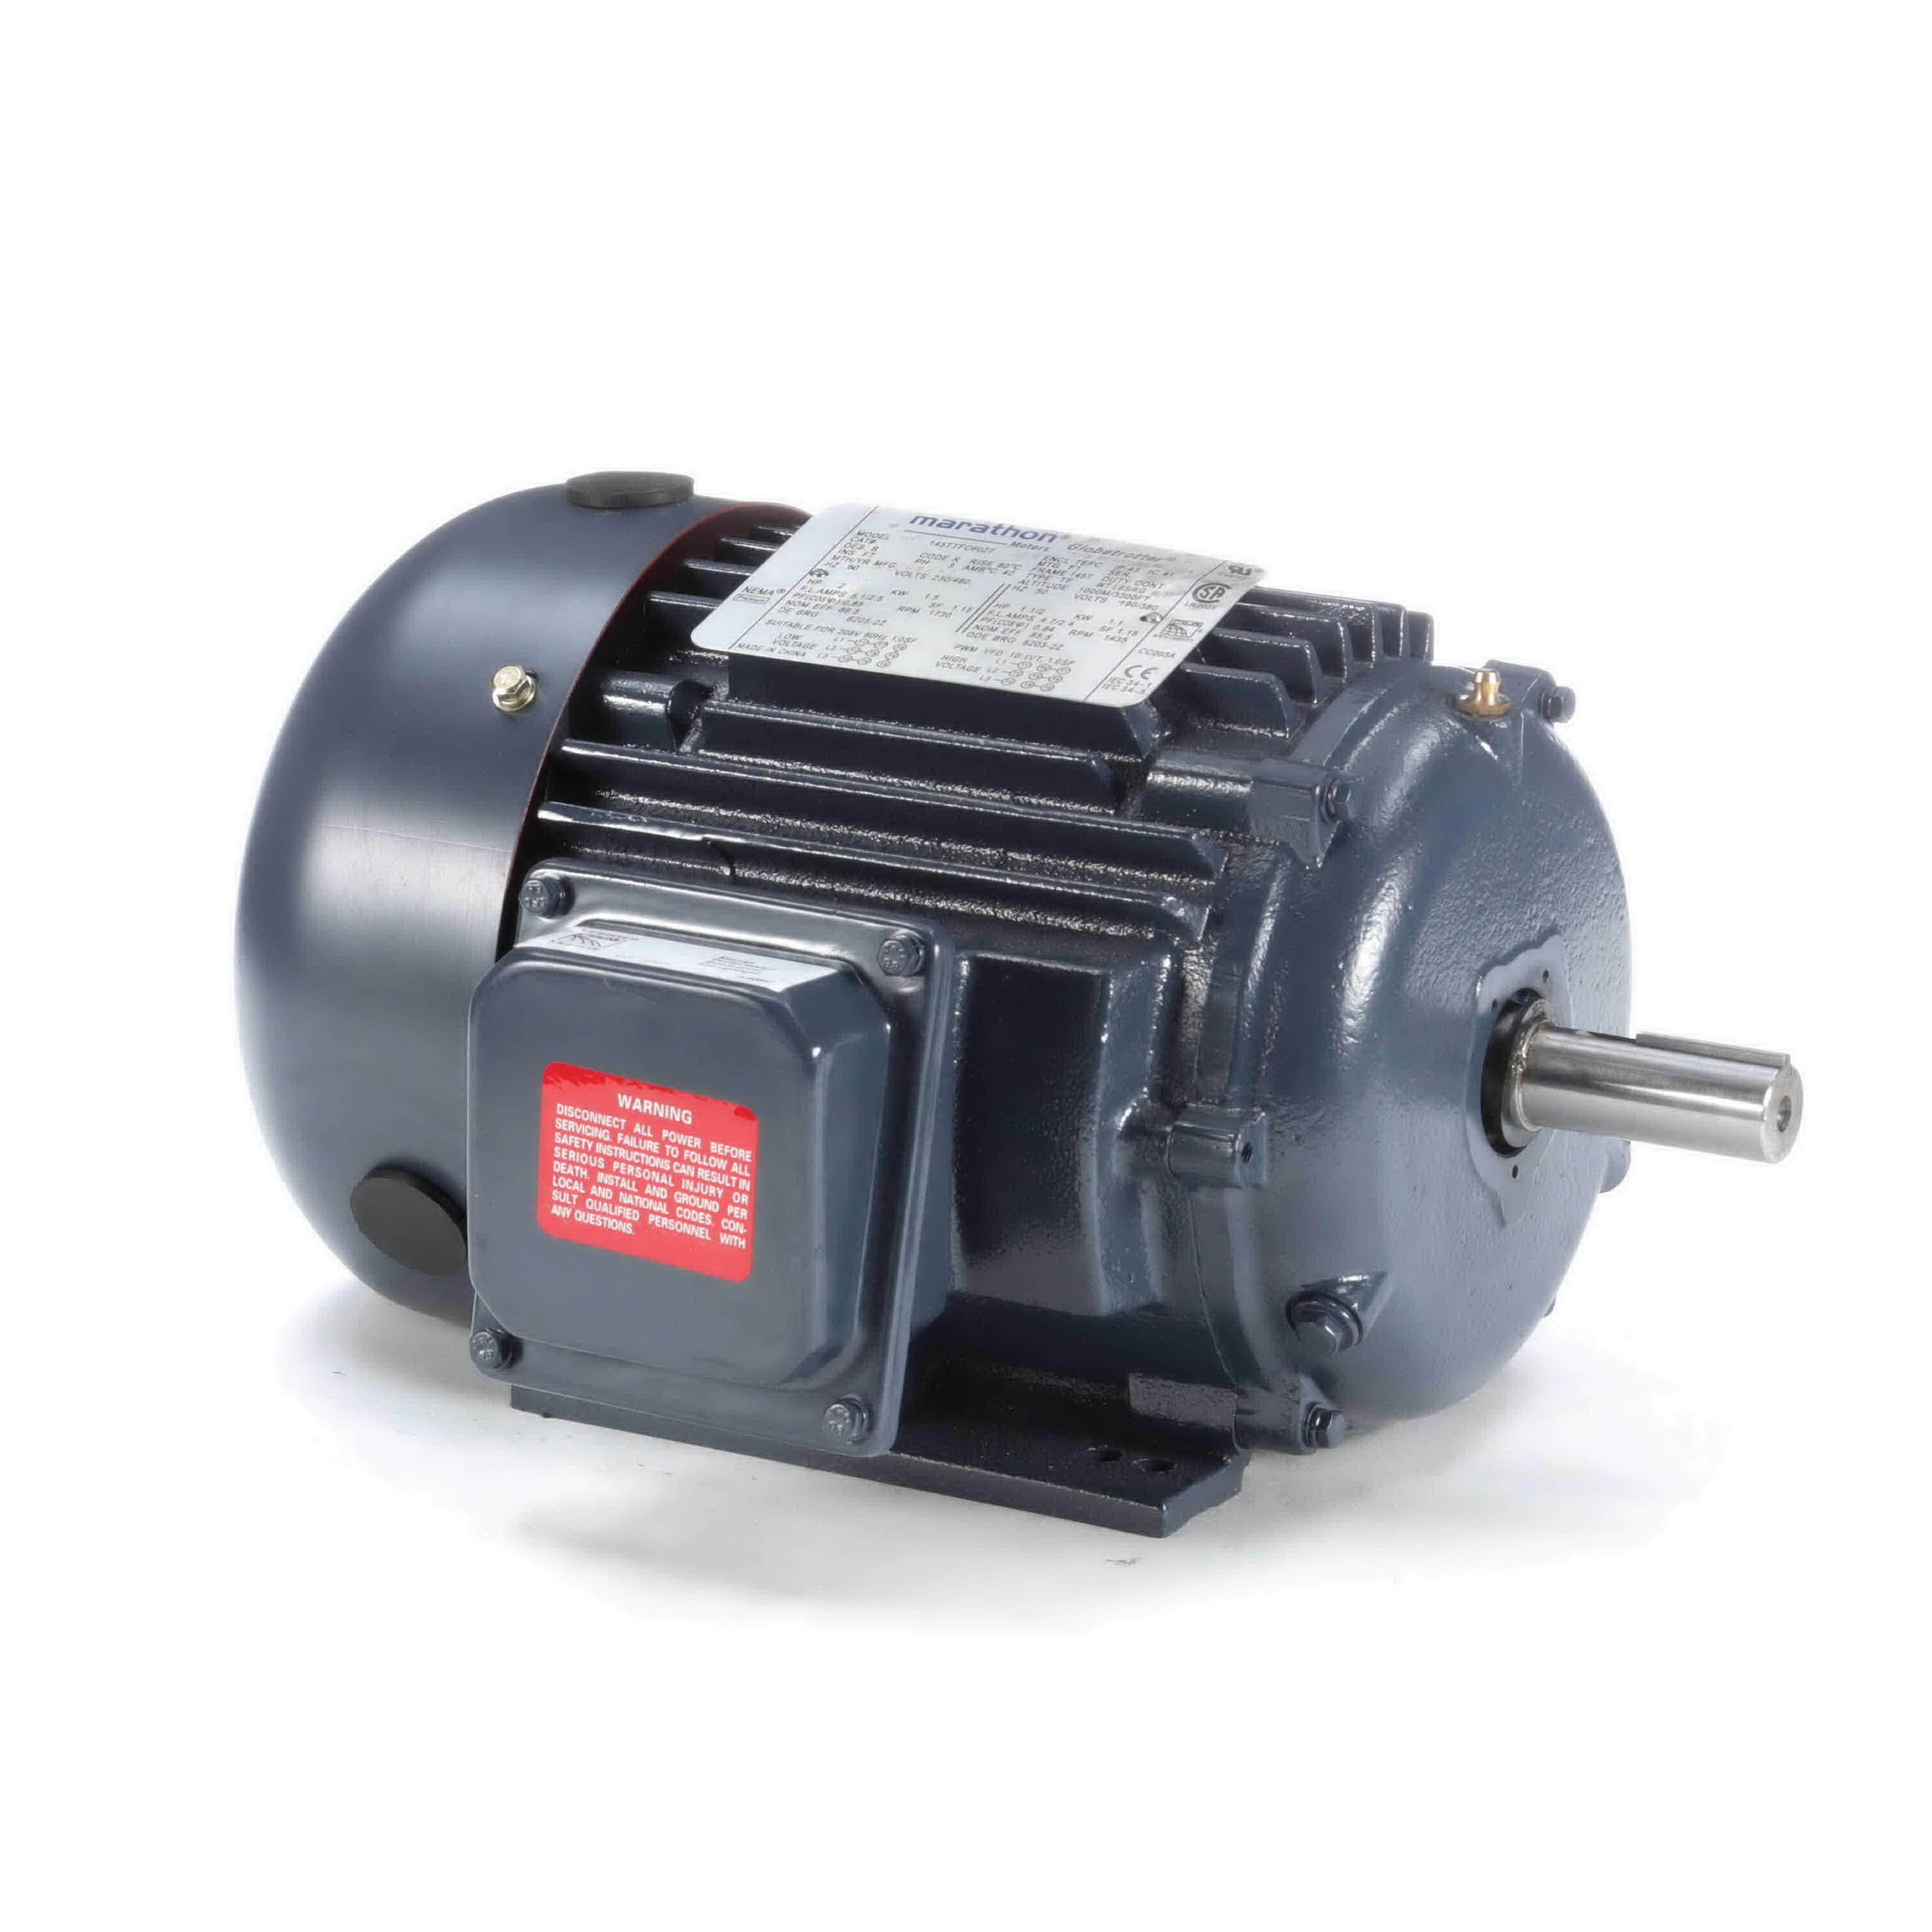 Marathon® Globetrotter® GT1007 General Purpose Motor, 208 to 230/460 V, 2.5 A/5 to 5.5 A, 1.5 kW, 2 hp, 1730 rpm Speed